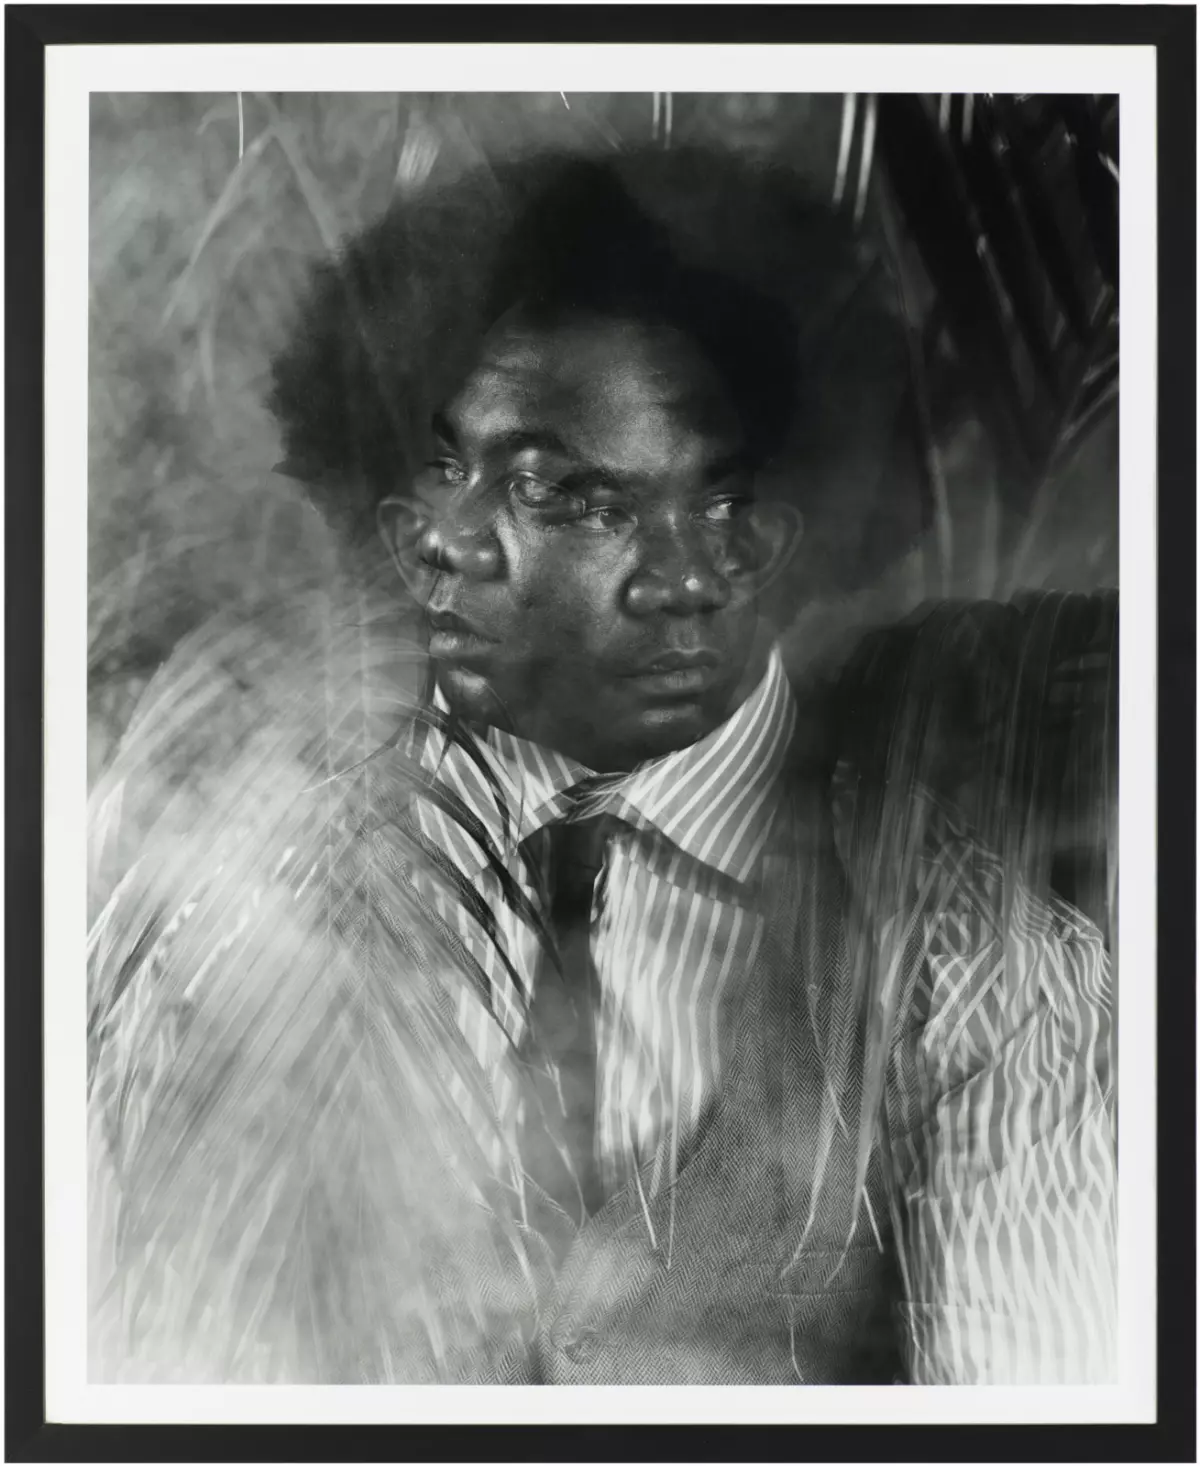 This black-and-white vertical portrait portrays a dark-skinned person with two faces, one looking left and the other looking right, with palm-like fronds surrounding the figure.